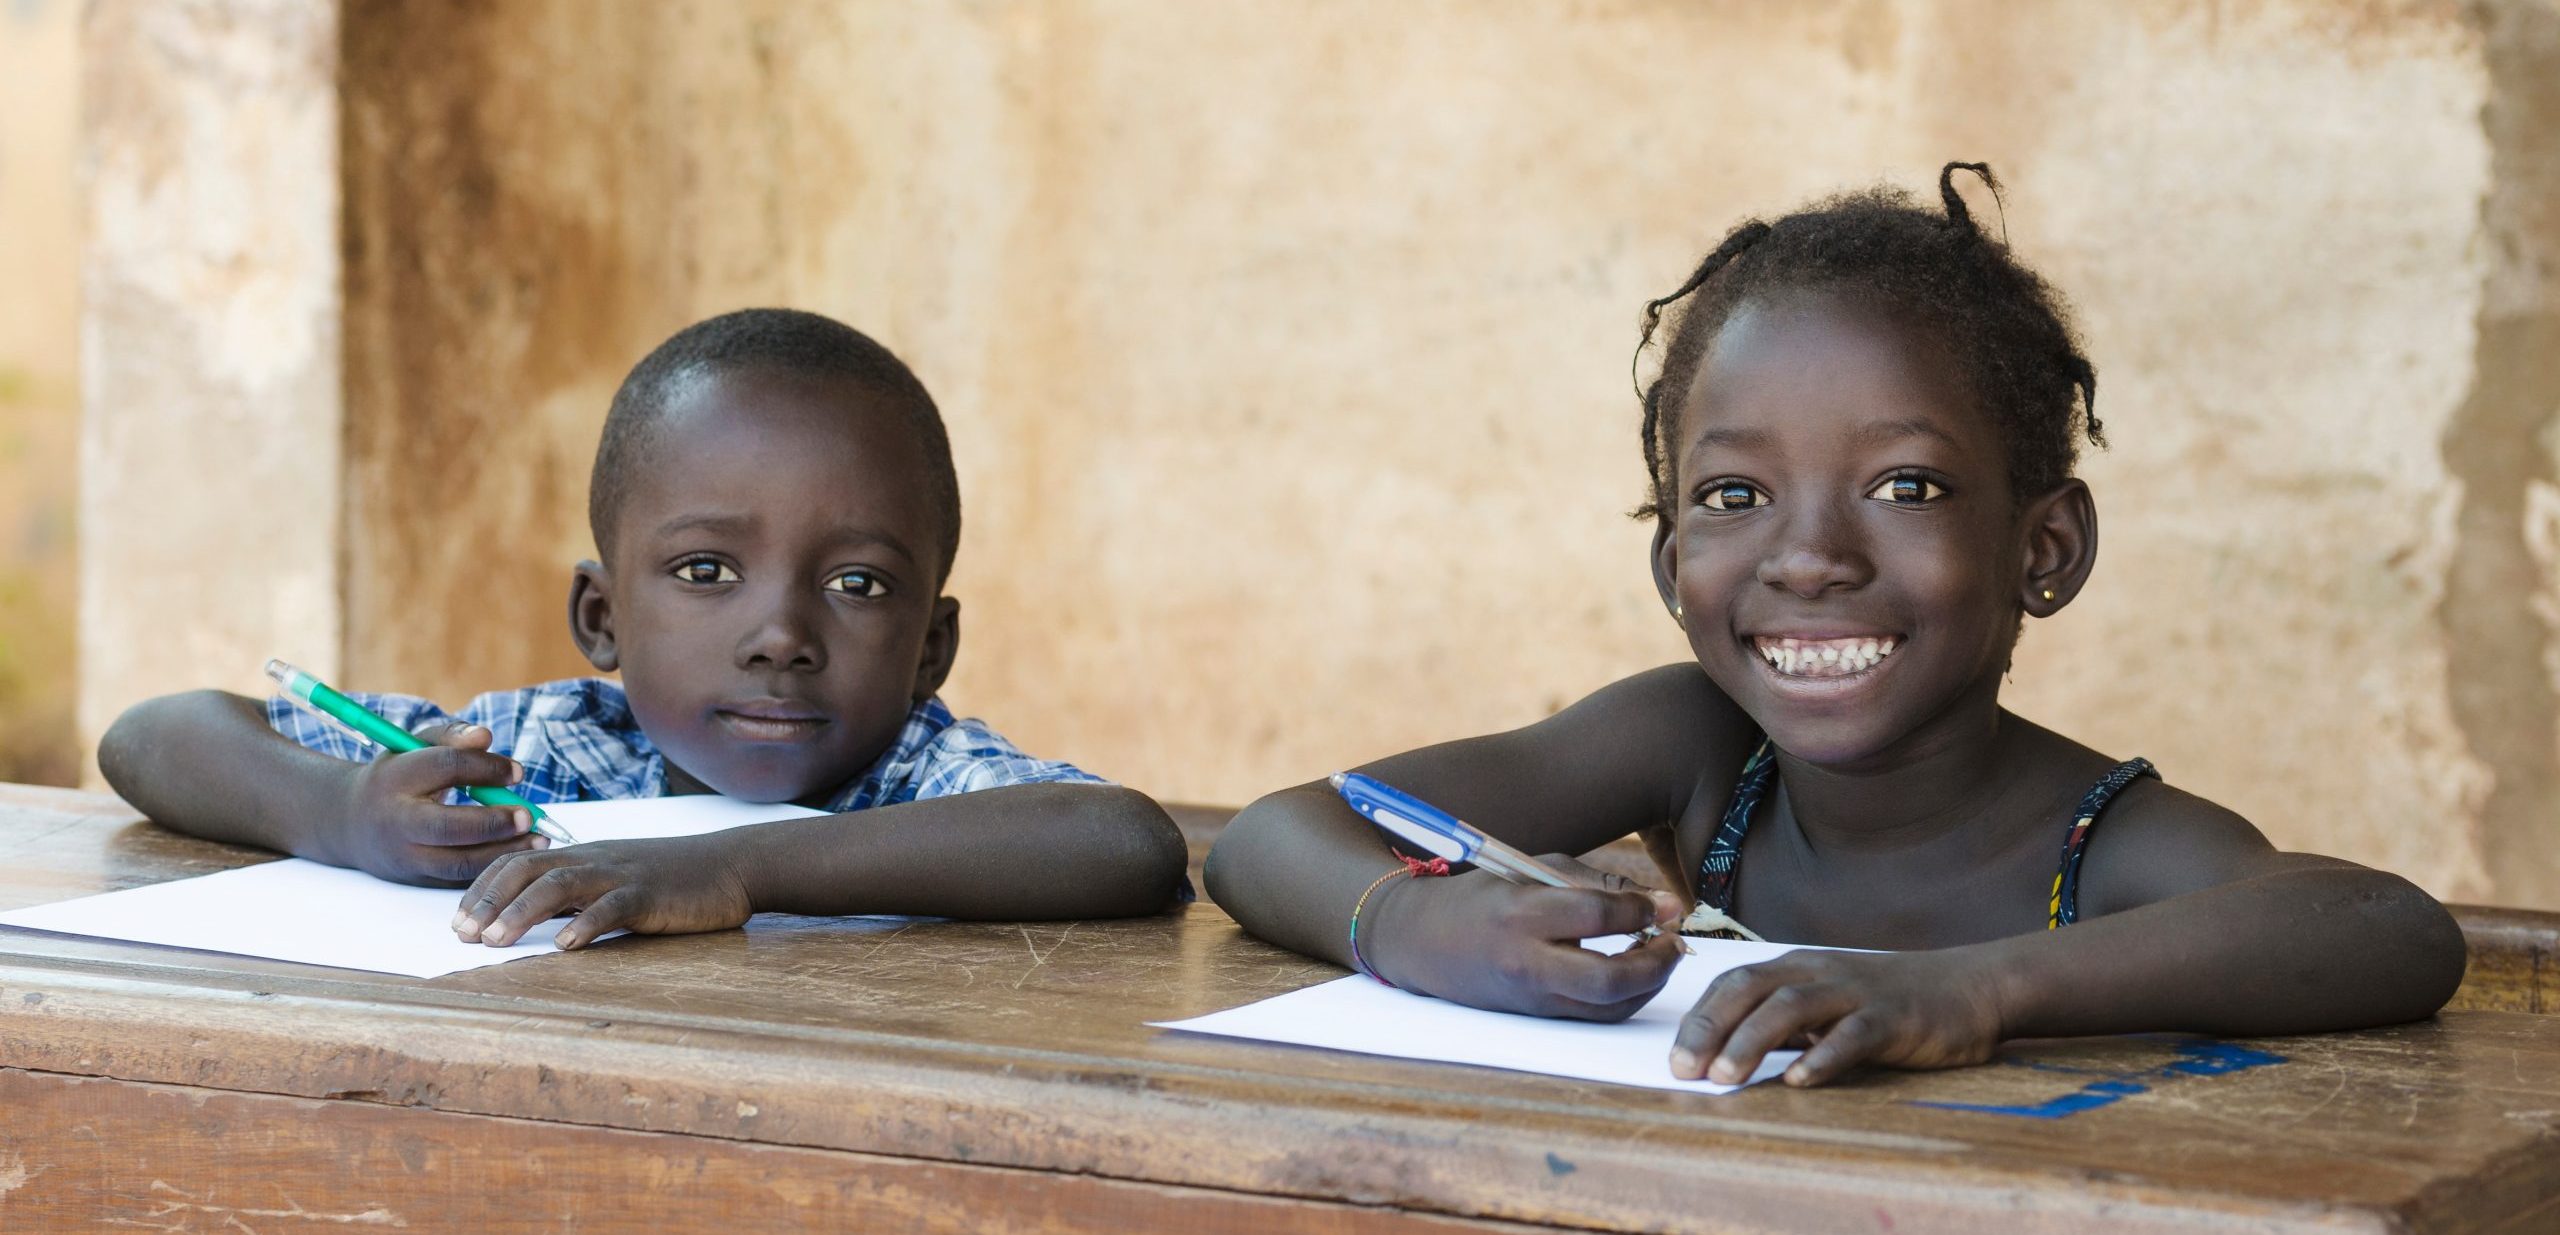 Two children sitting at a desk with paper and writing implements in Mali, Africa